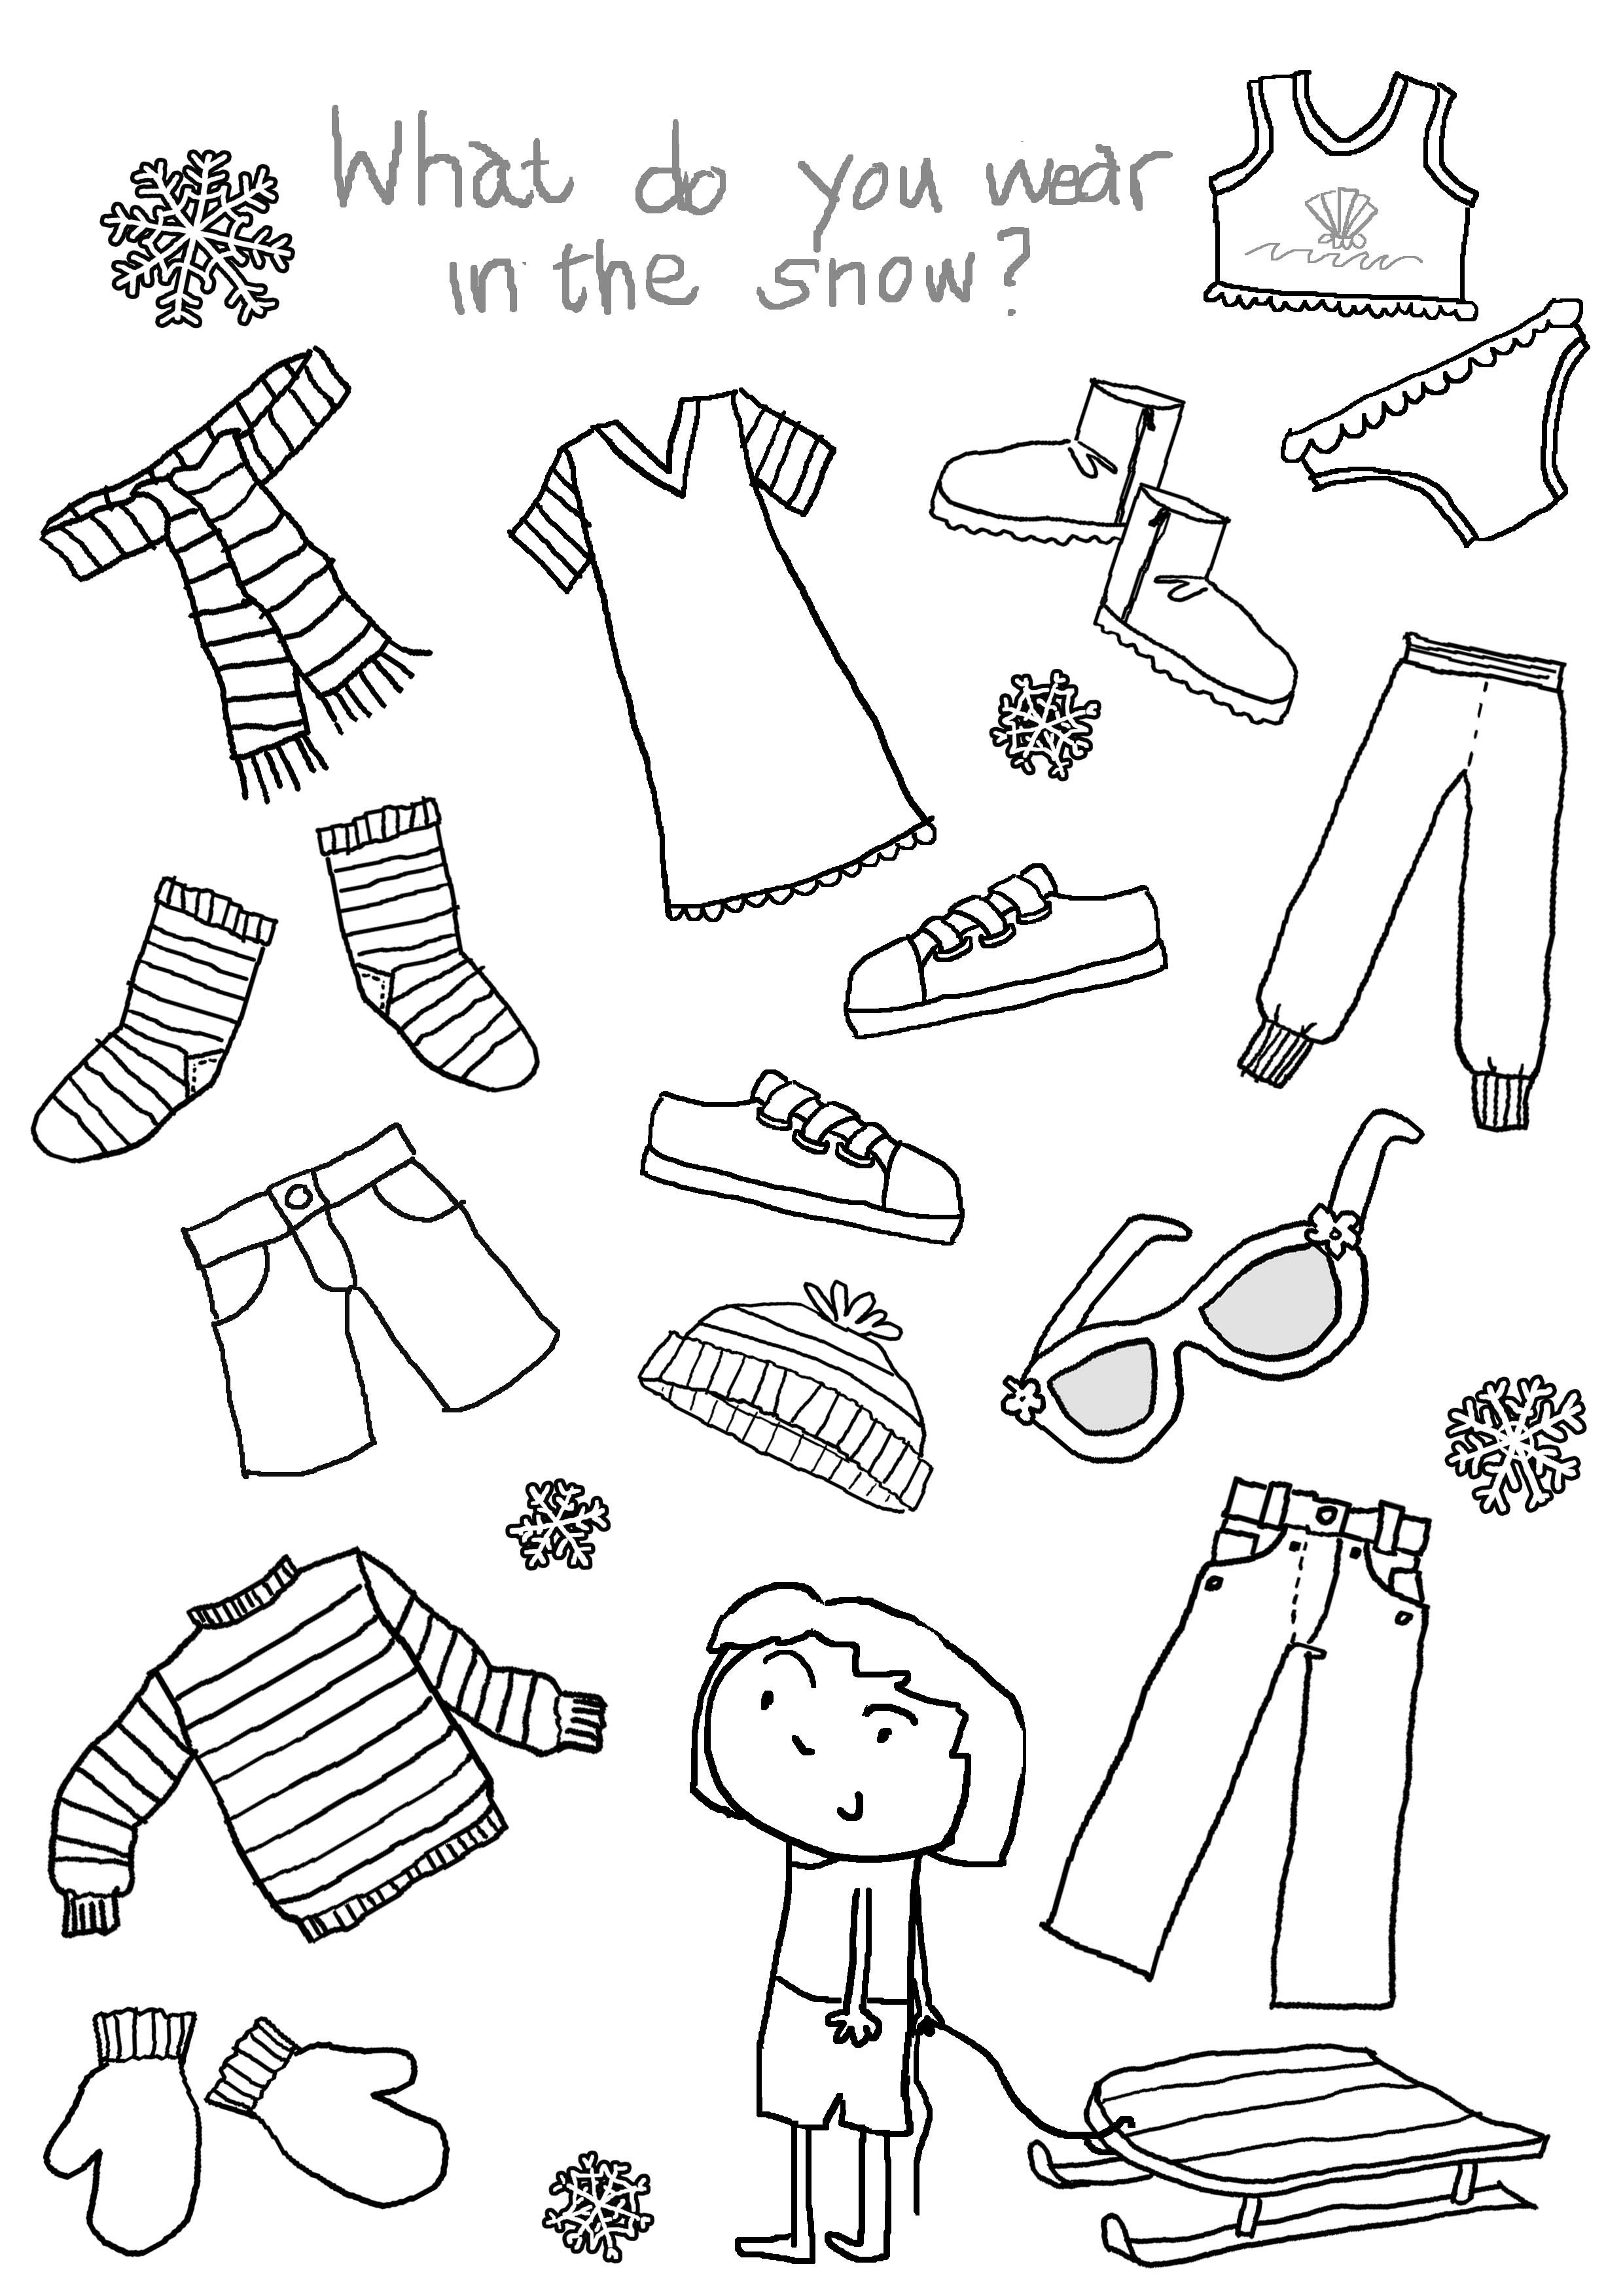 Free Coloring Sheets Of Kids Dressed In Career Clothing
 14 Best of Clothes For Children Worksheets Winter